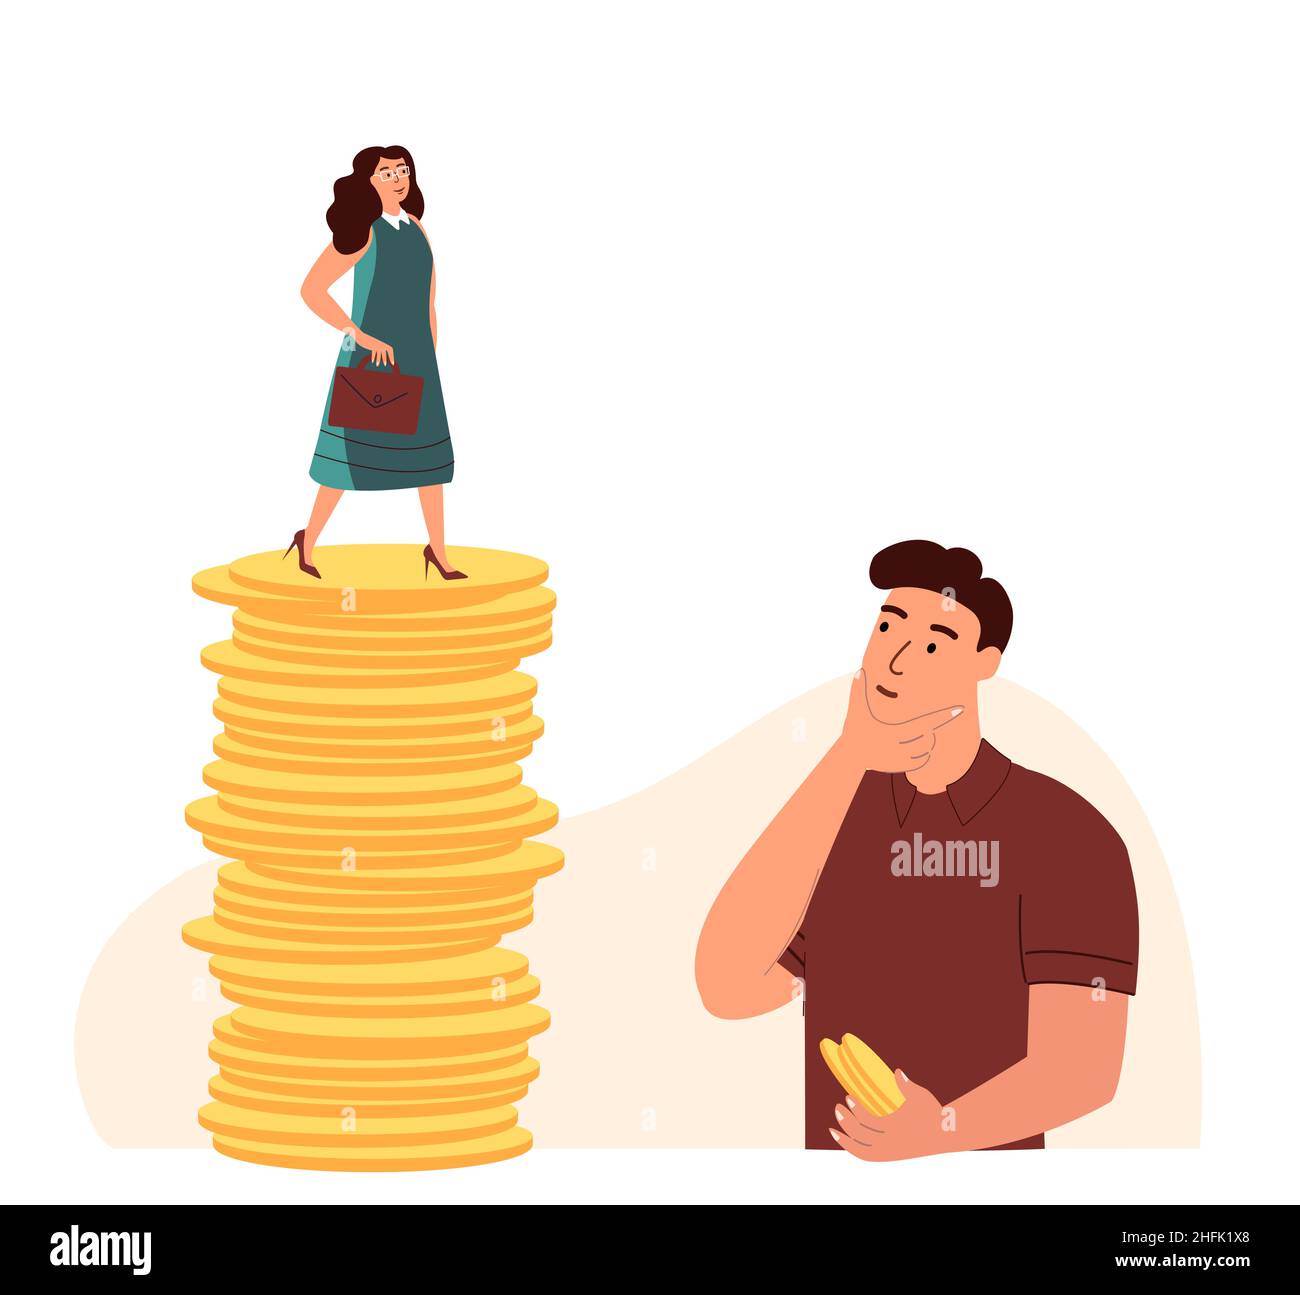 Salary gap concept. Inequality of money incomes between rich wealthy woman and poor man. Comparison of different financial levels of employees. Flat vector illustration isolated on white background Stock Vector